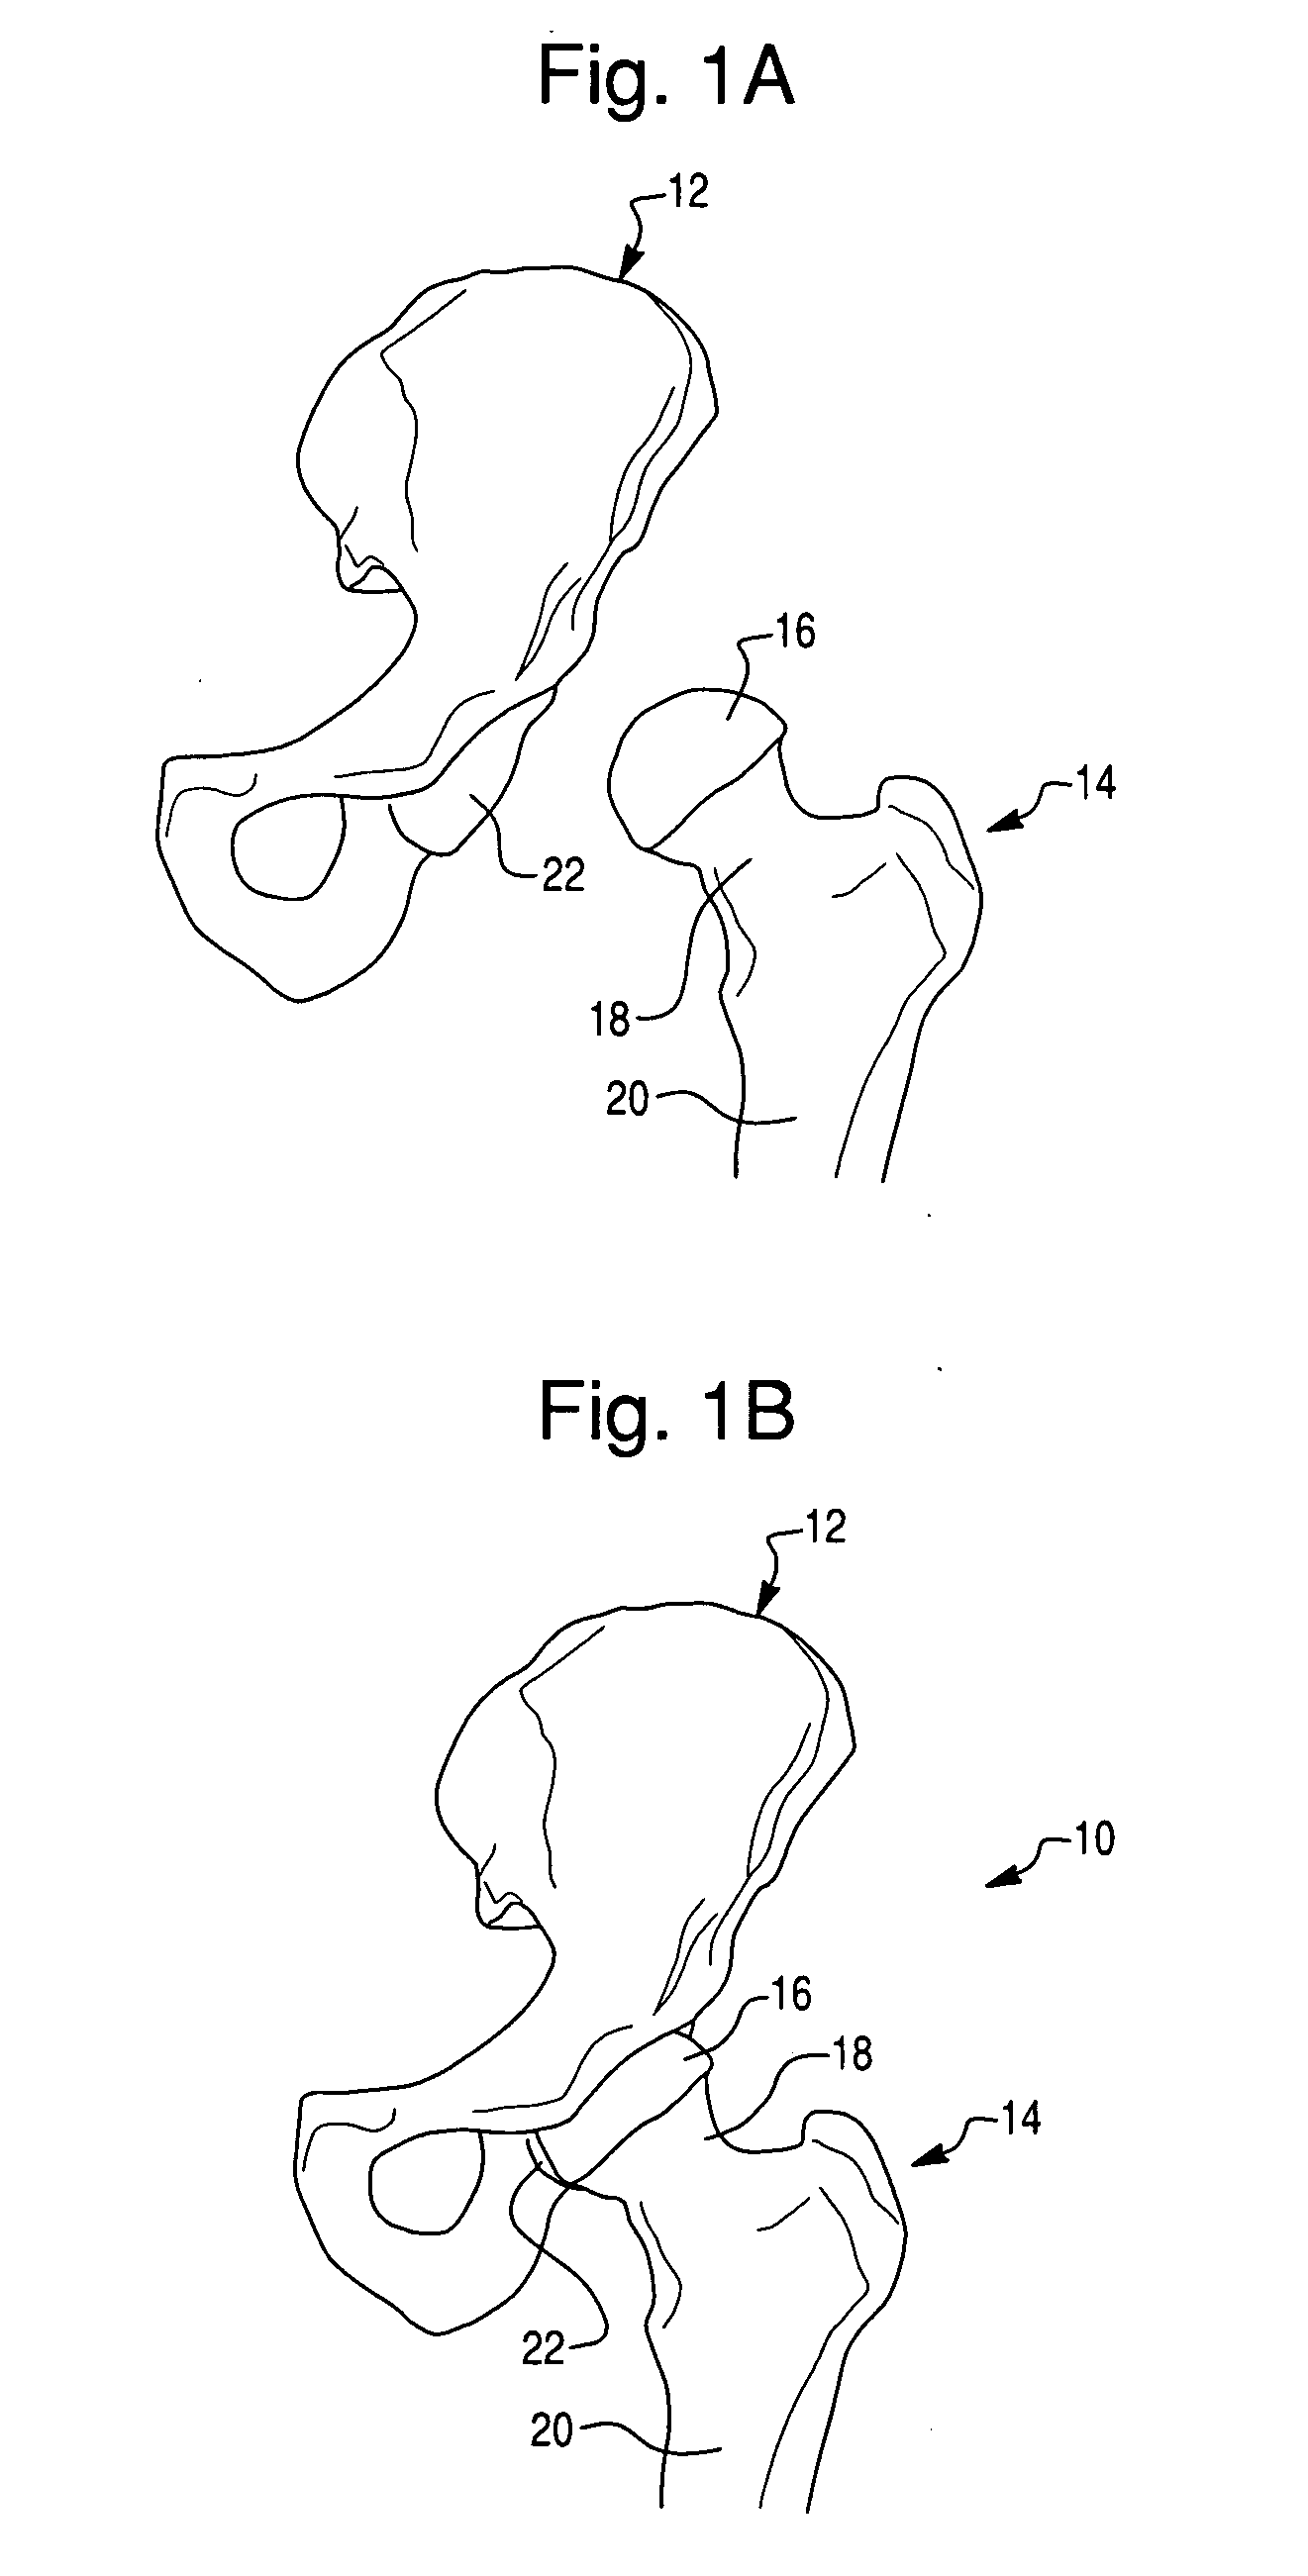 Tool, kit-of-parts for multi-functional tool, and robotic system for same